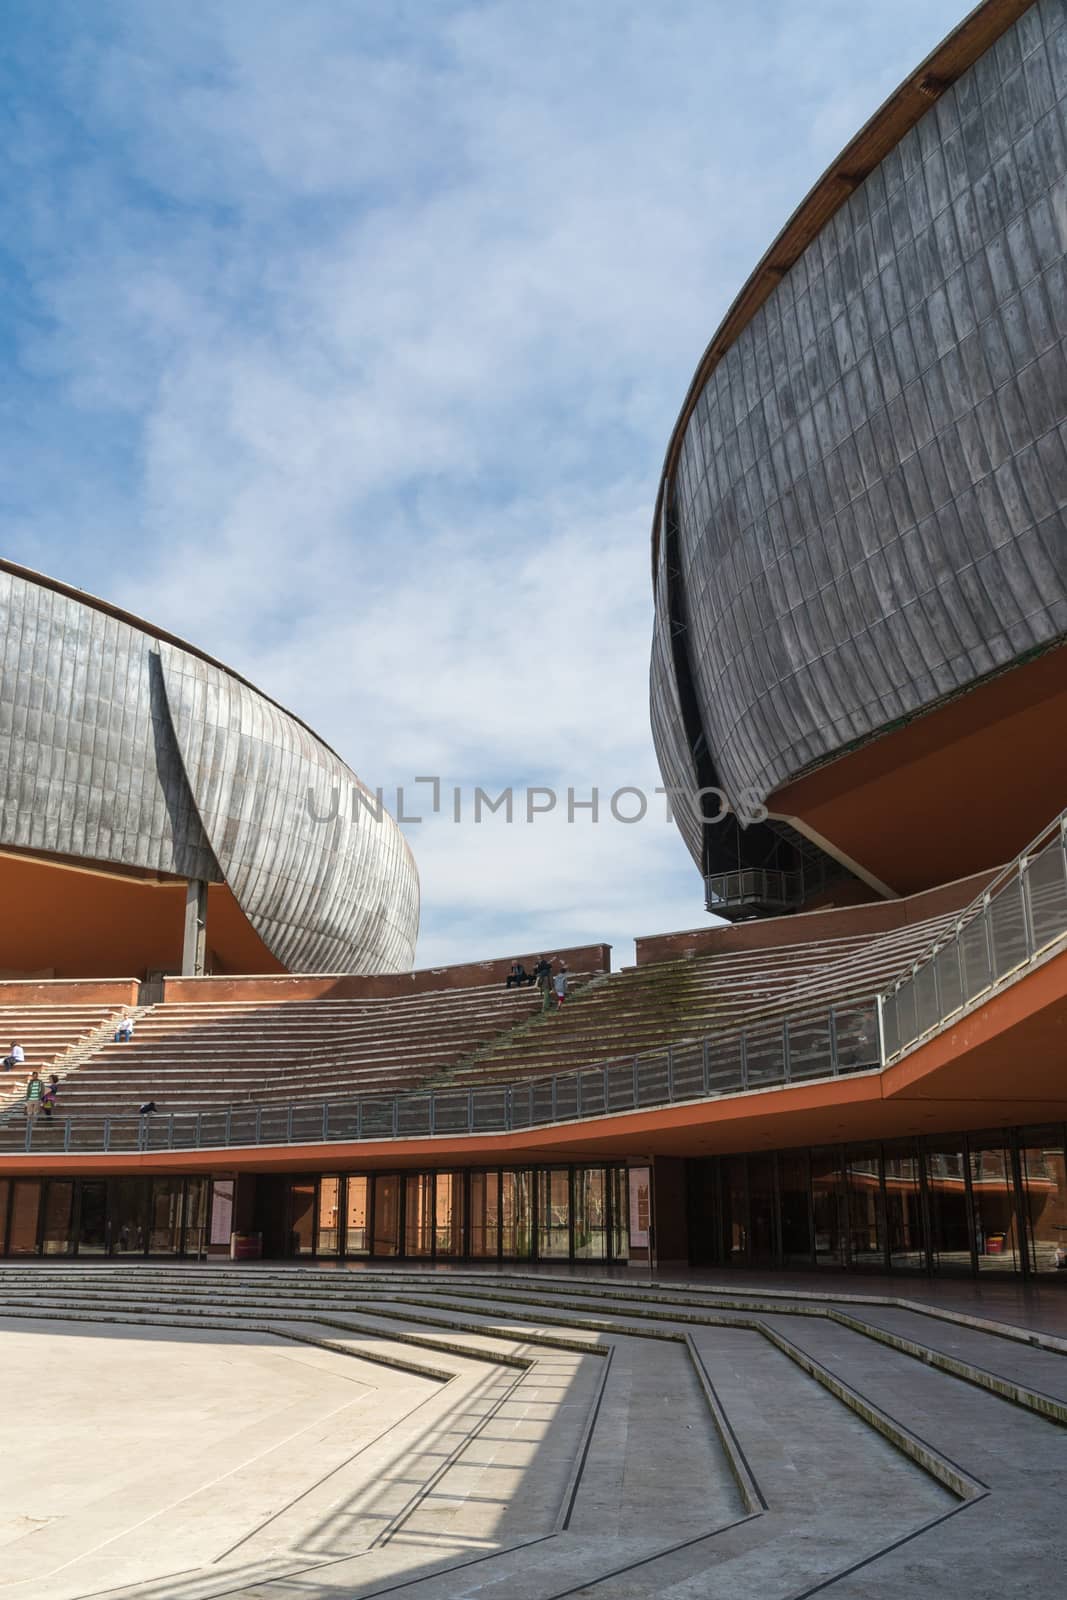 View of the Auditorium in Rome, a building by the famous architect Renzo Piano